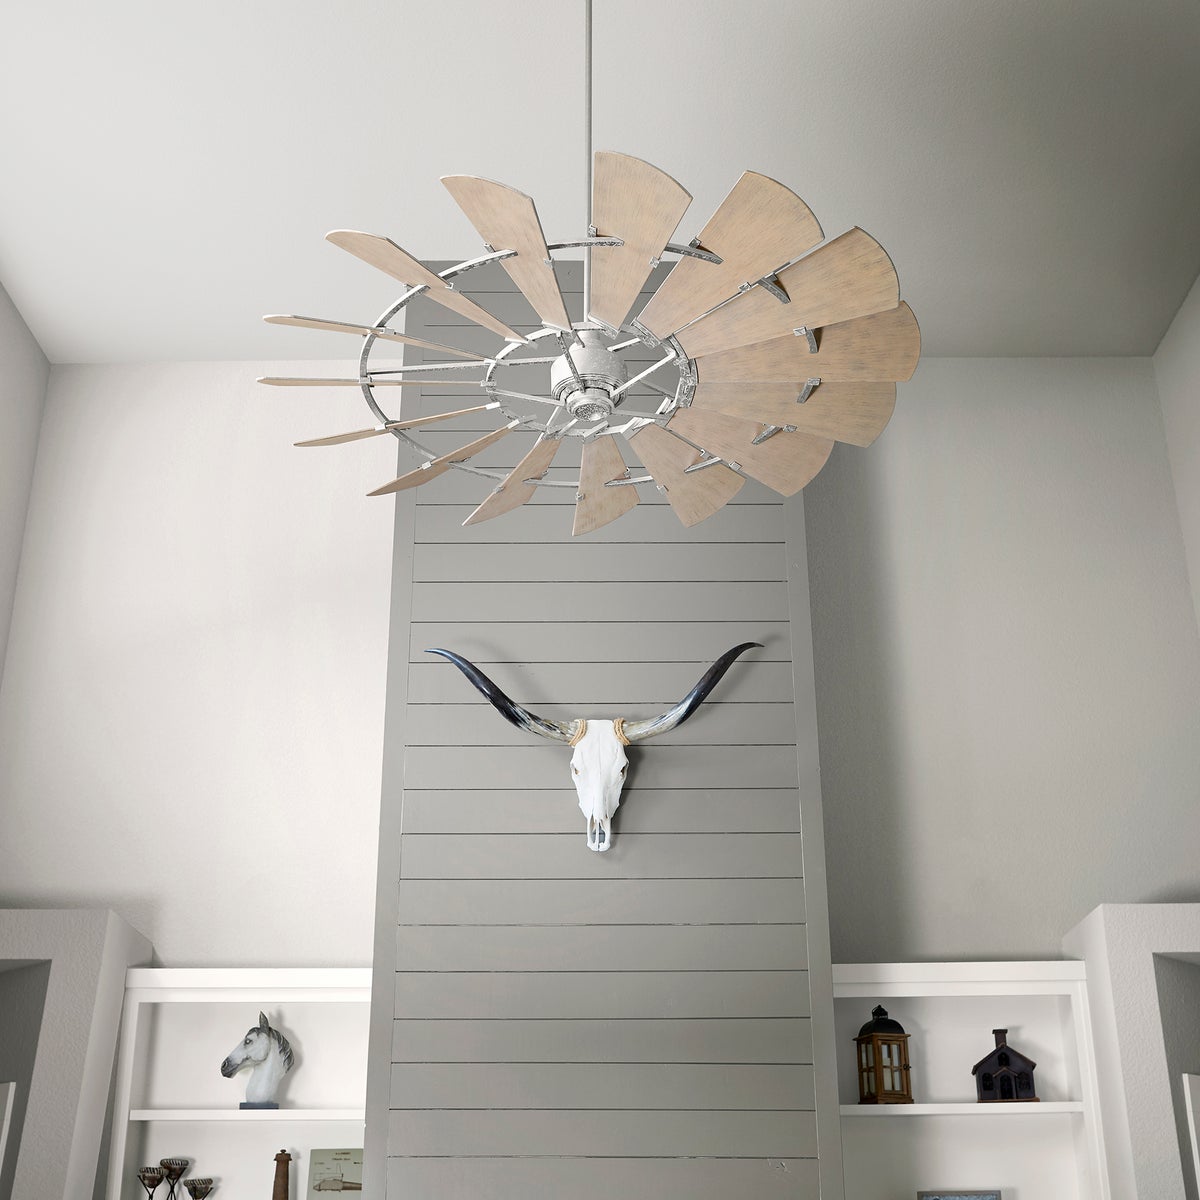 Farmhouse Ceiling Fan with rustic wooden blades and a weathered oak finish, complementing the country chic design. Incorporates the look of an outdoor windmill.